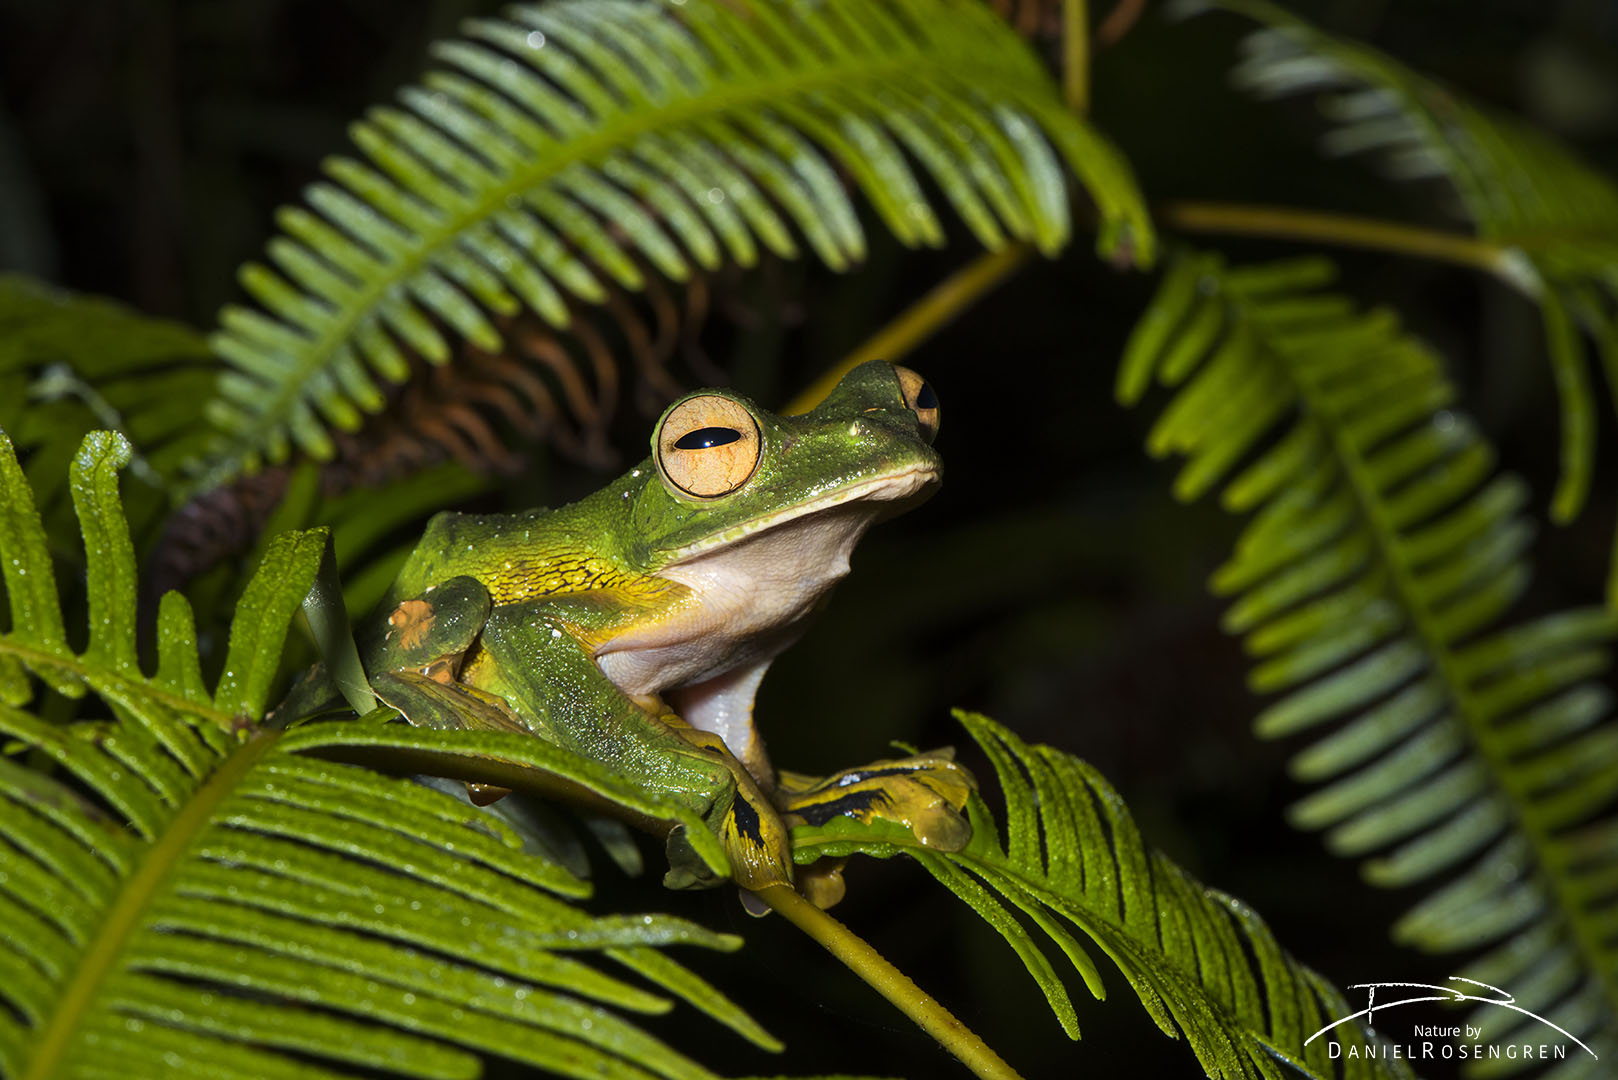 The Flying Frog can't actually fly, but can indeed glide quite well using the webbing between their toes. © Daniel Rosengren